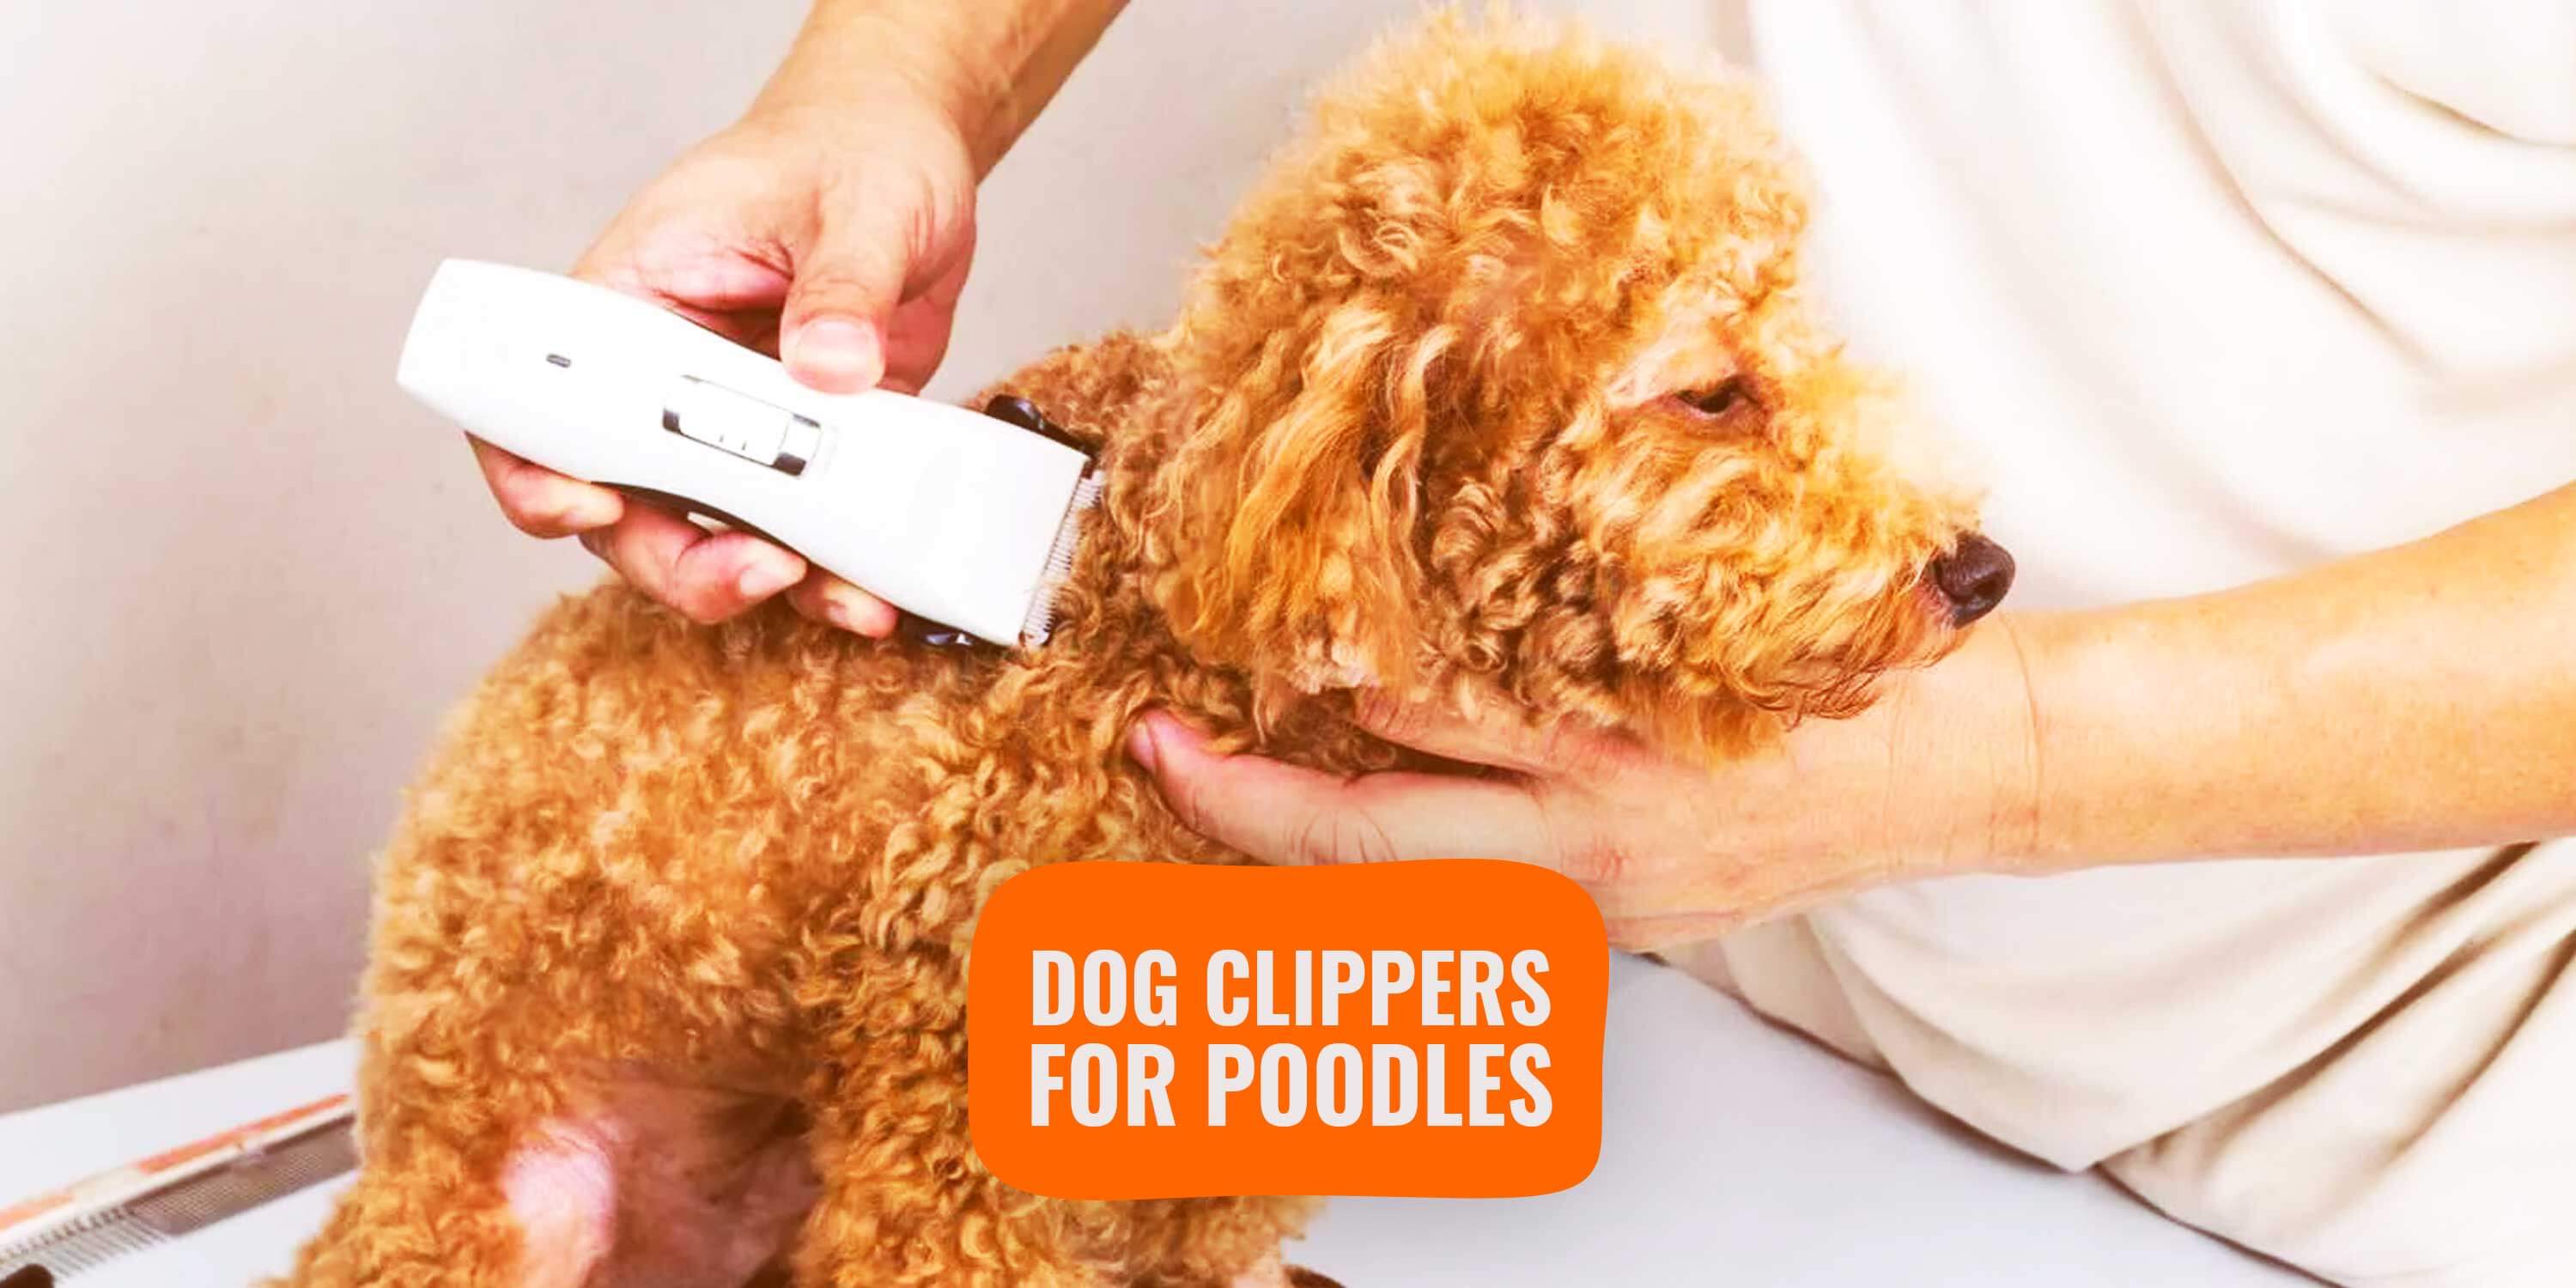 professional poodle clippers